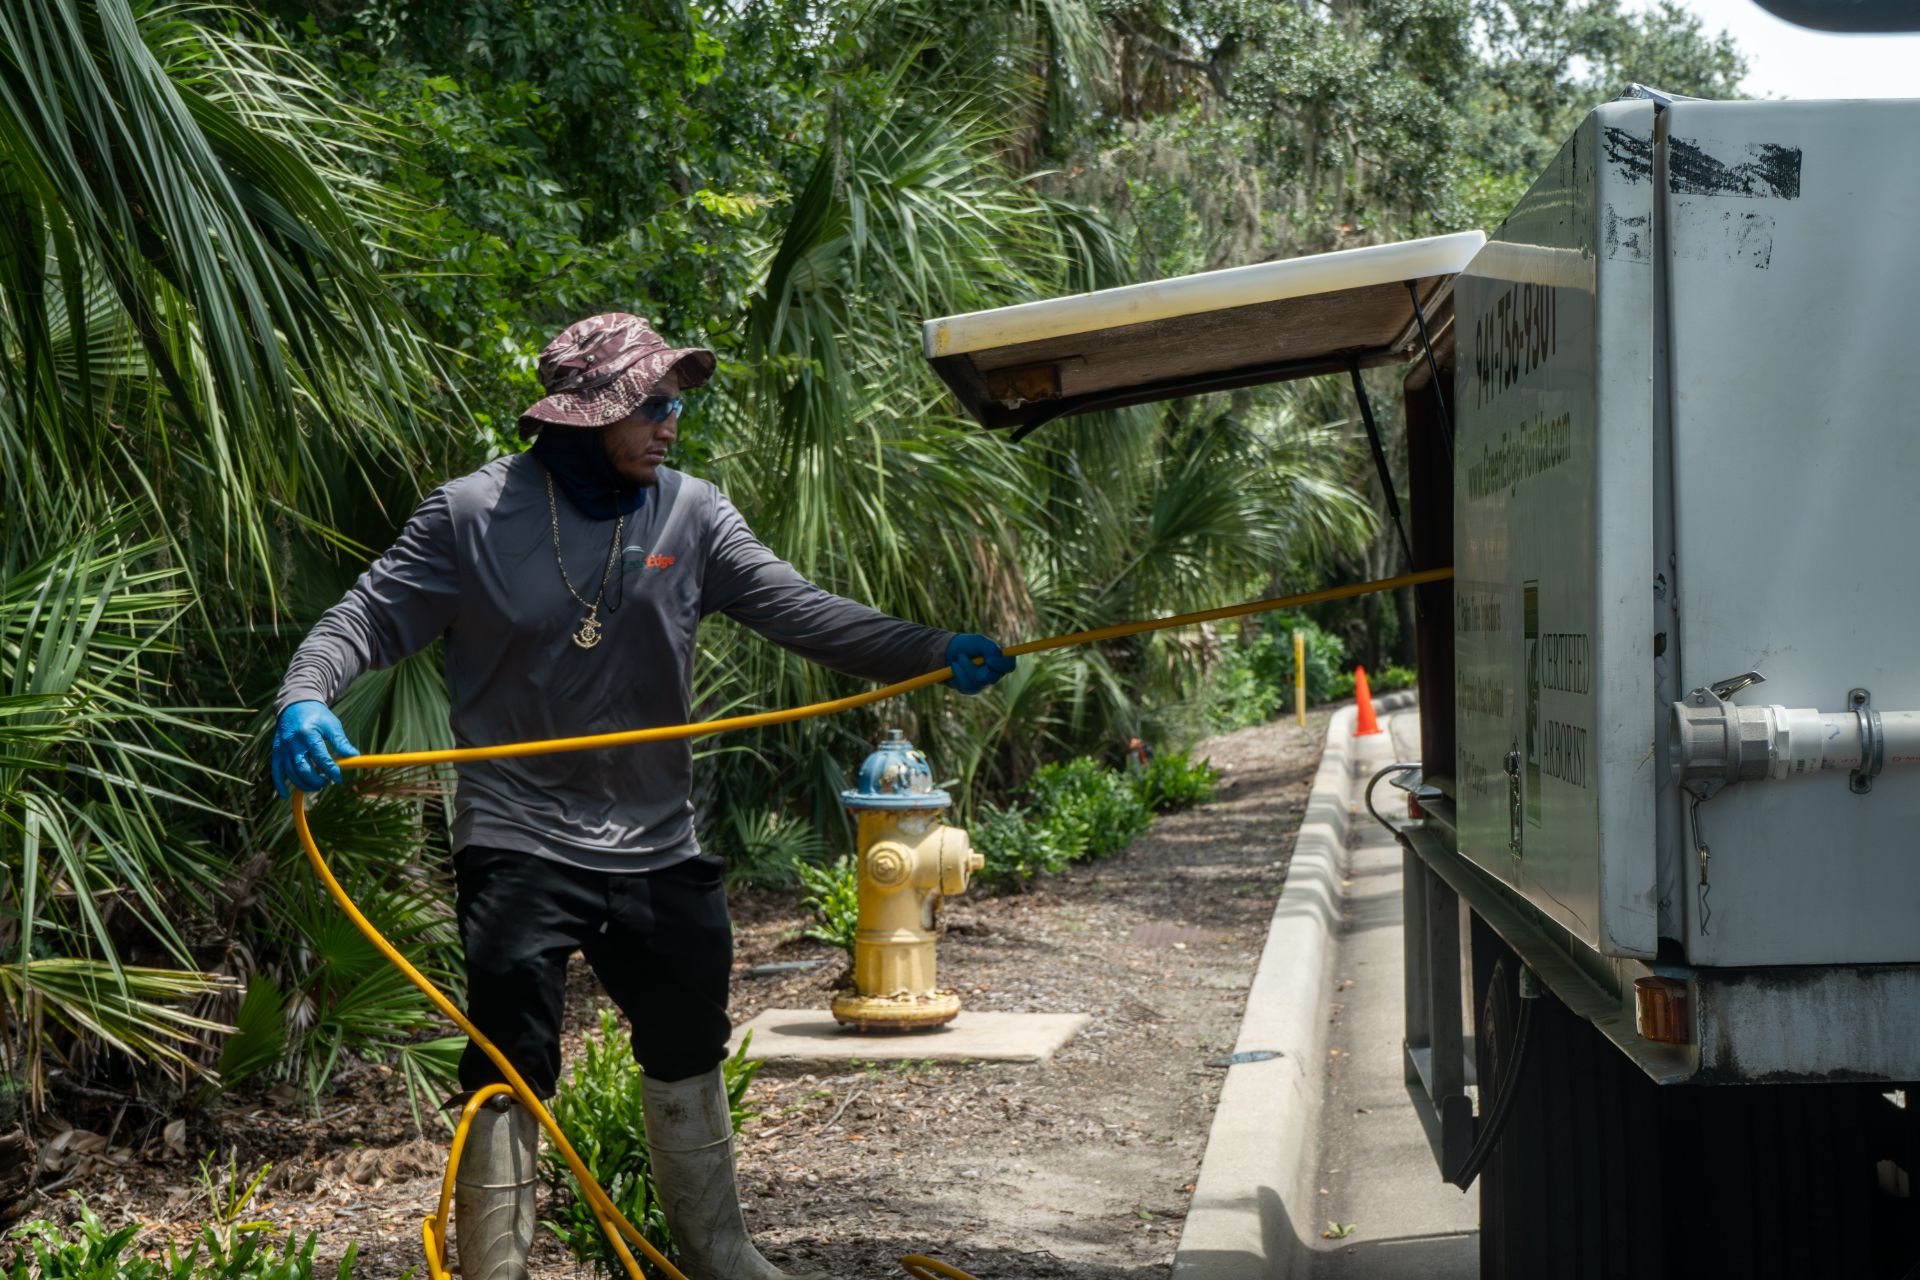 A GreenEdge staff member pulling a hose from a company truck in Sarasota. Our dedicated team utilizes this equipment to efficiently deliver water or other necessary substances to maintain the health and beauty of your landscape. Trust GreenEdge for expert irrigation services and reliable care for your outdoor spaces.